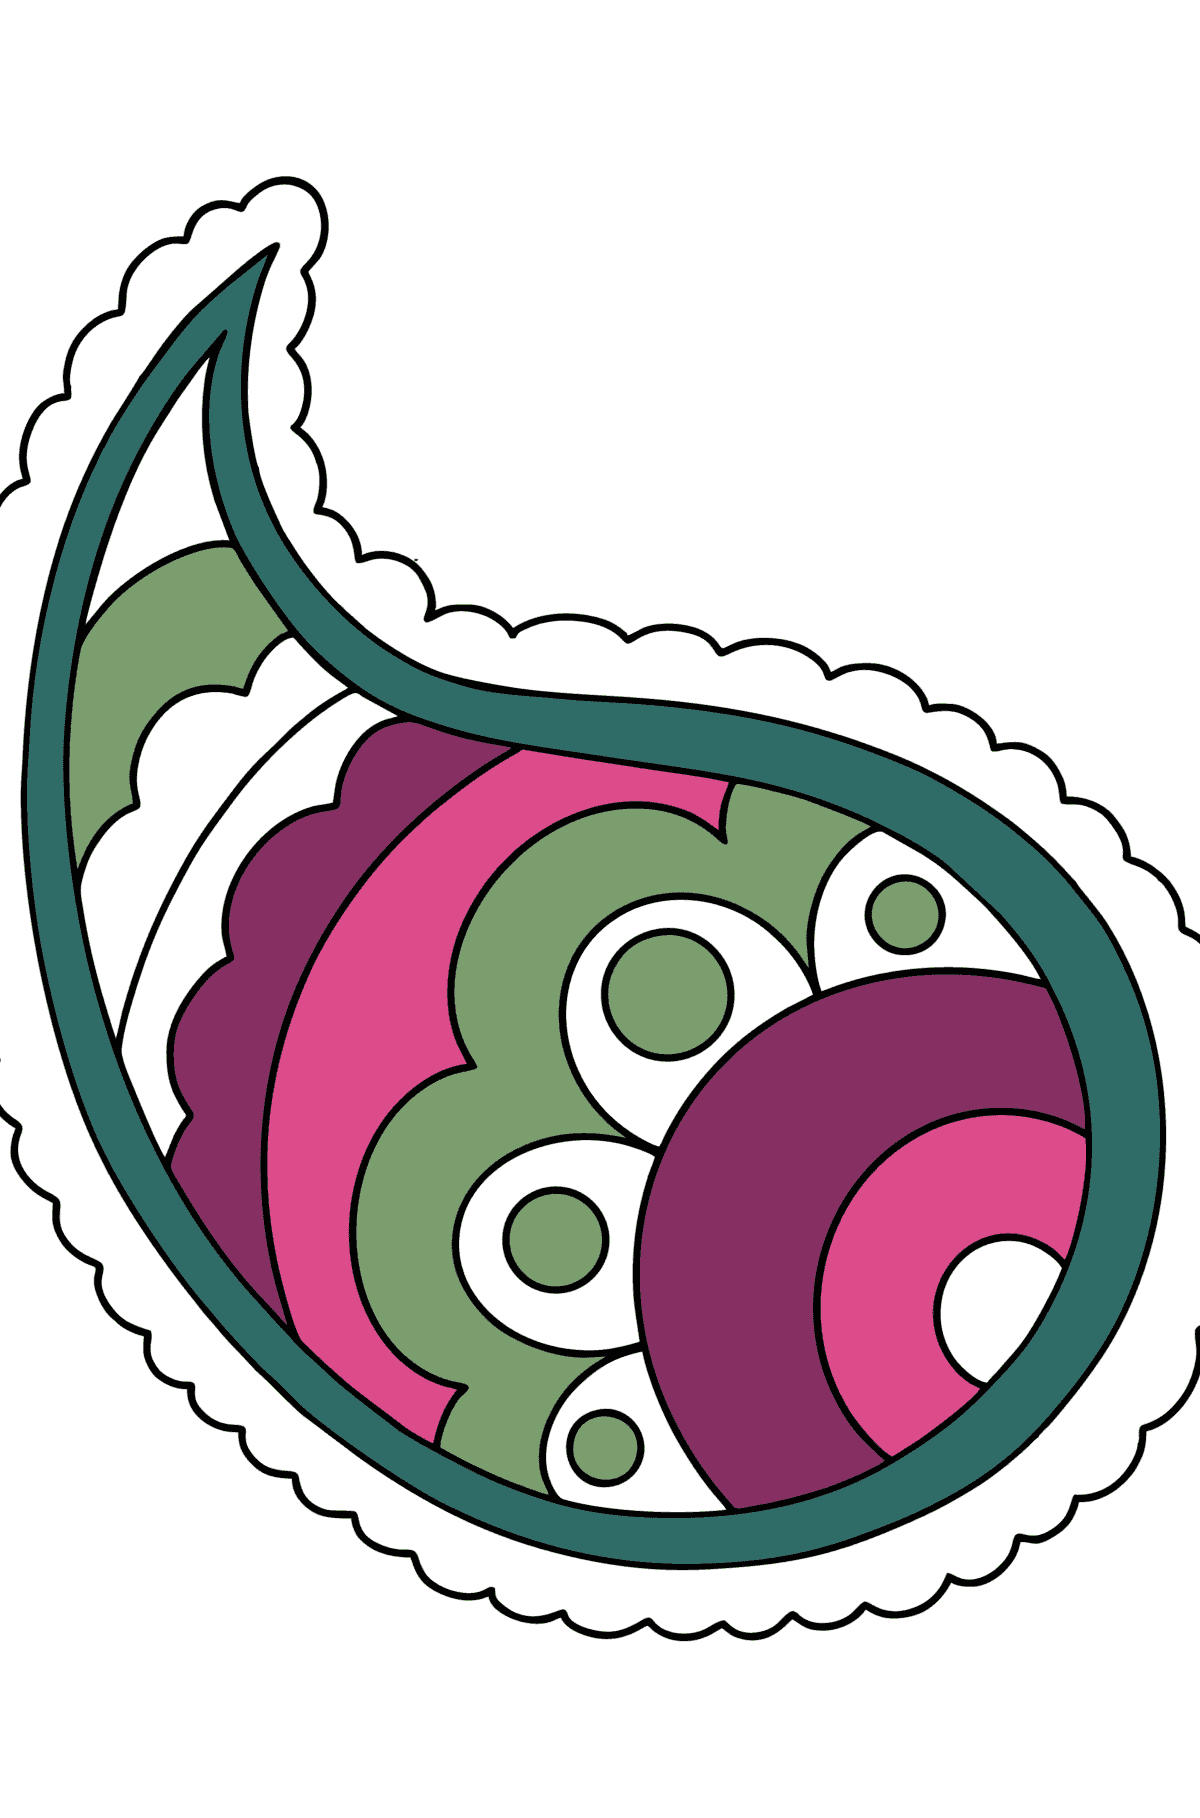 Paisley coloring page - 17 Elements - Coloring Pages for Kids